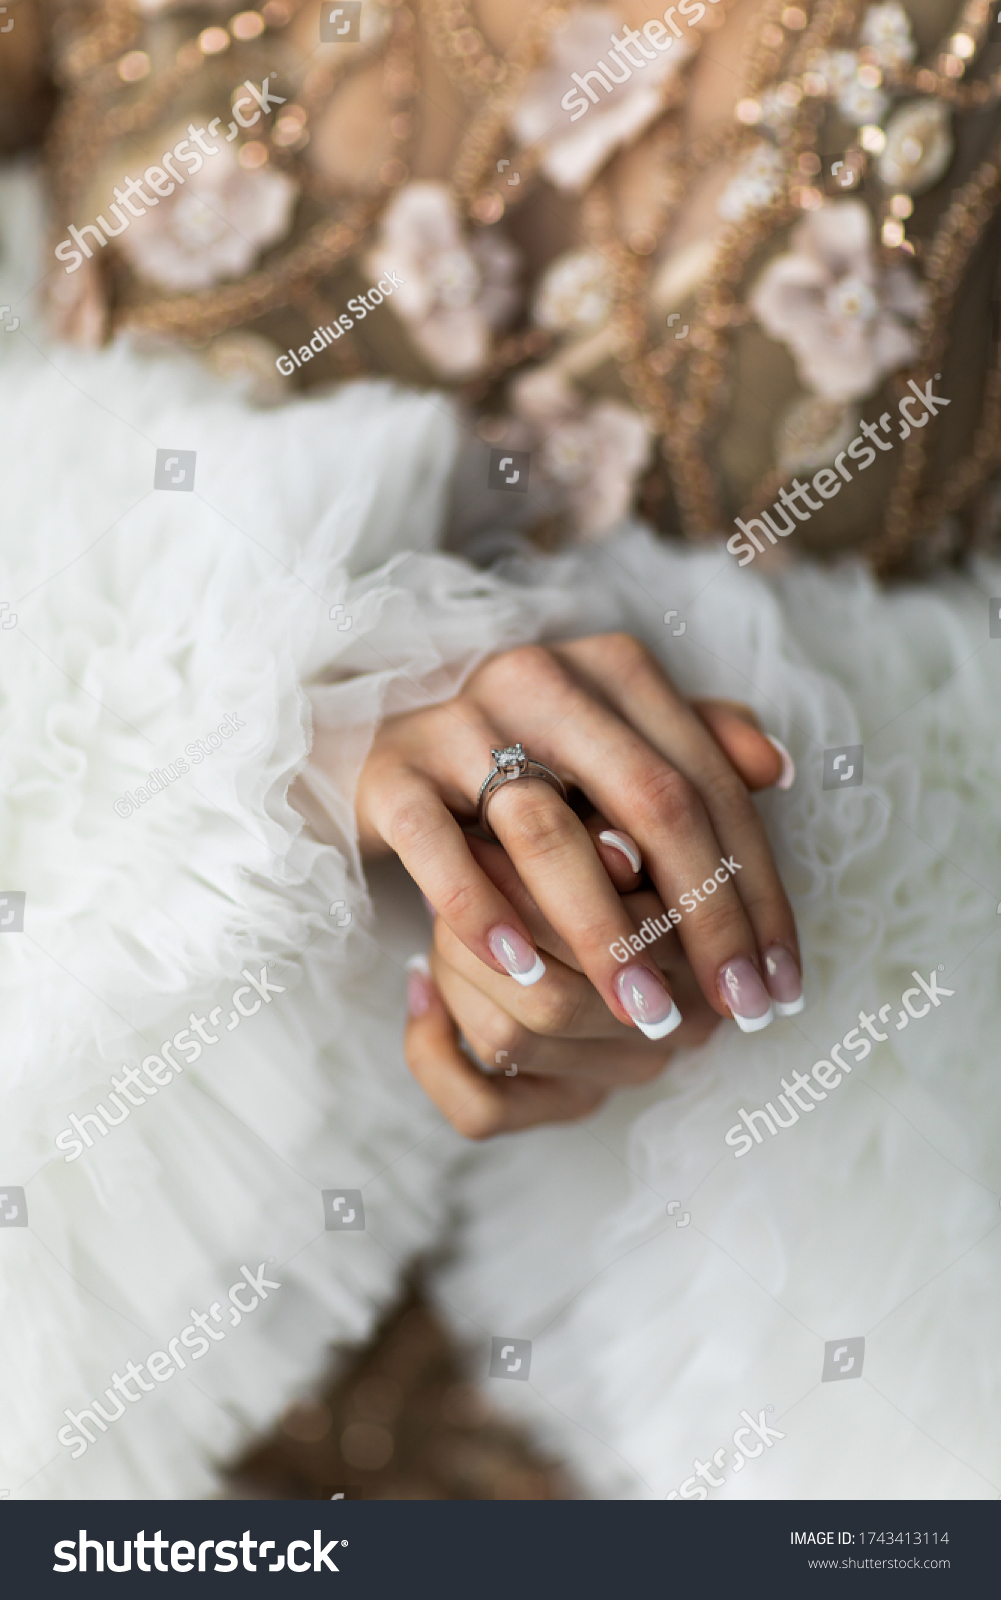 Couple. You can see the hands of woman. Sensually.Focus on the wedding ring